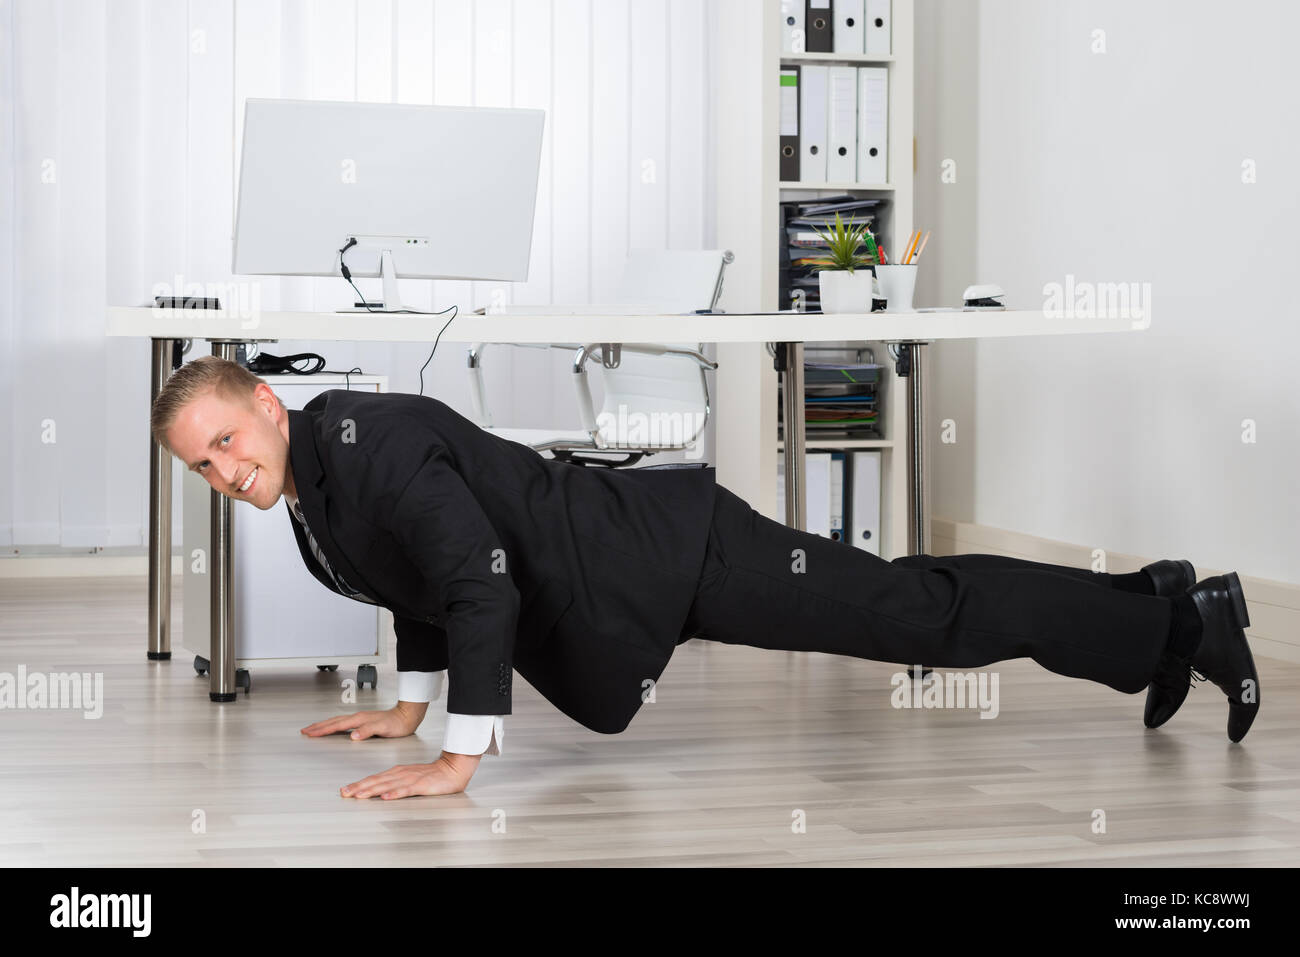 Young Businessman Doing Pushup At Work In Office Stock Photo